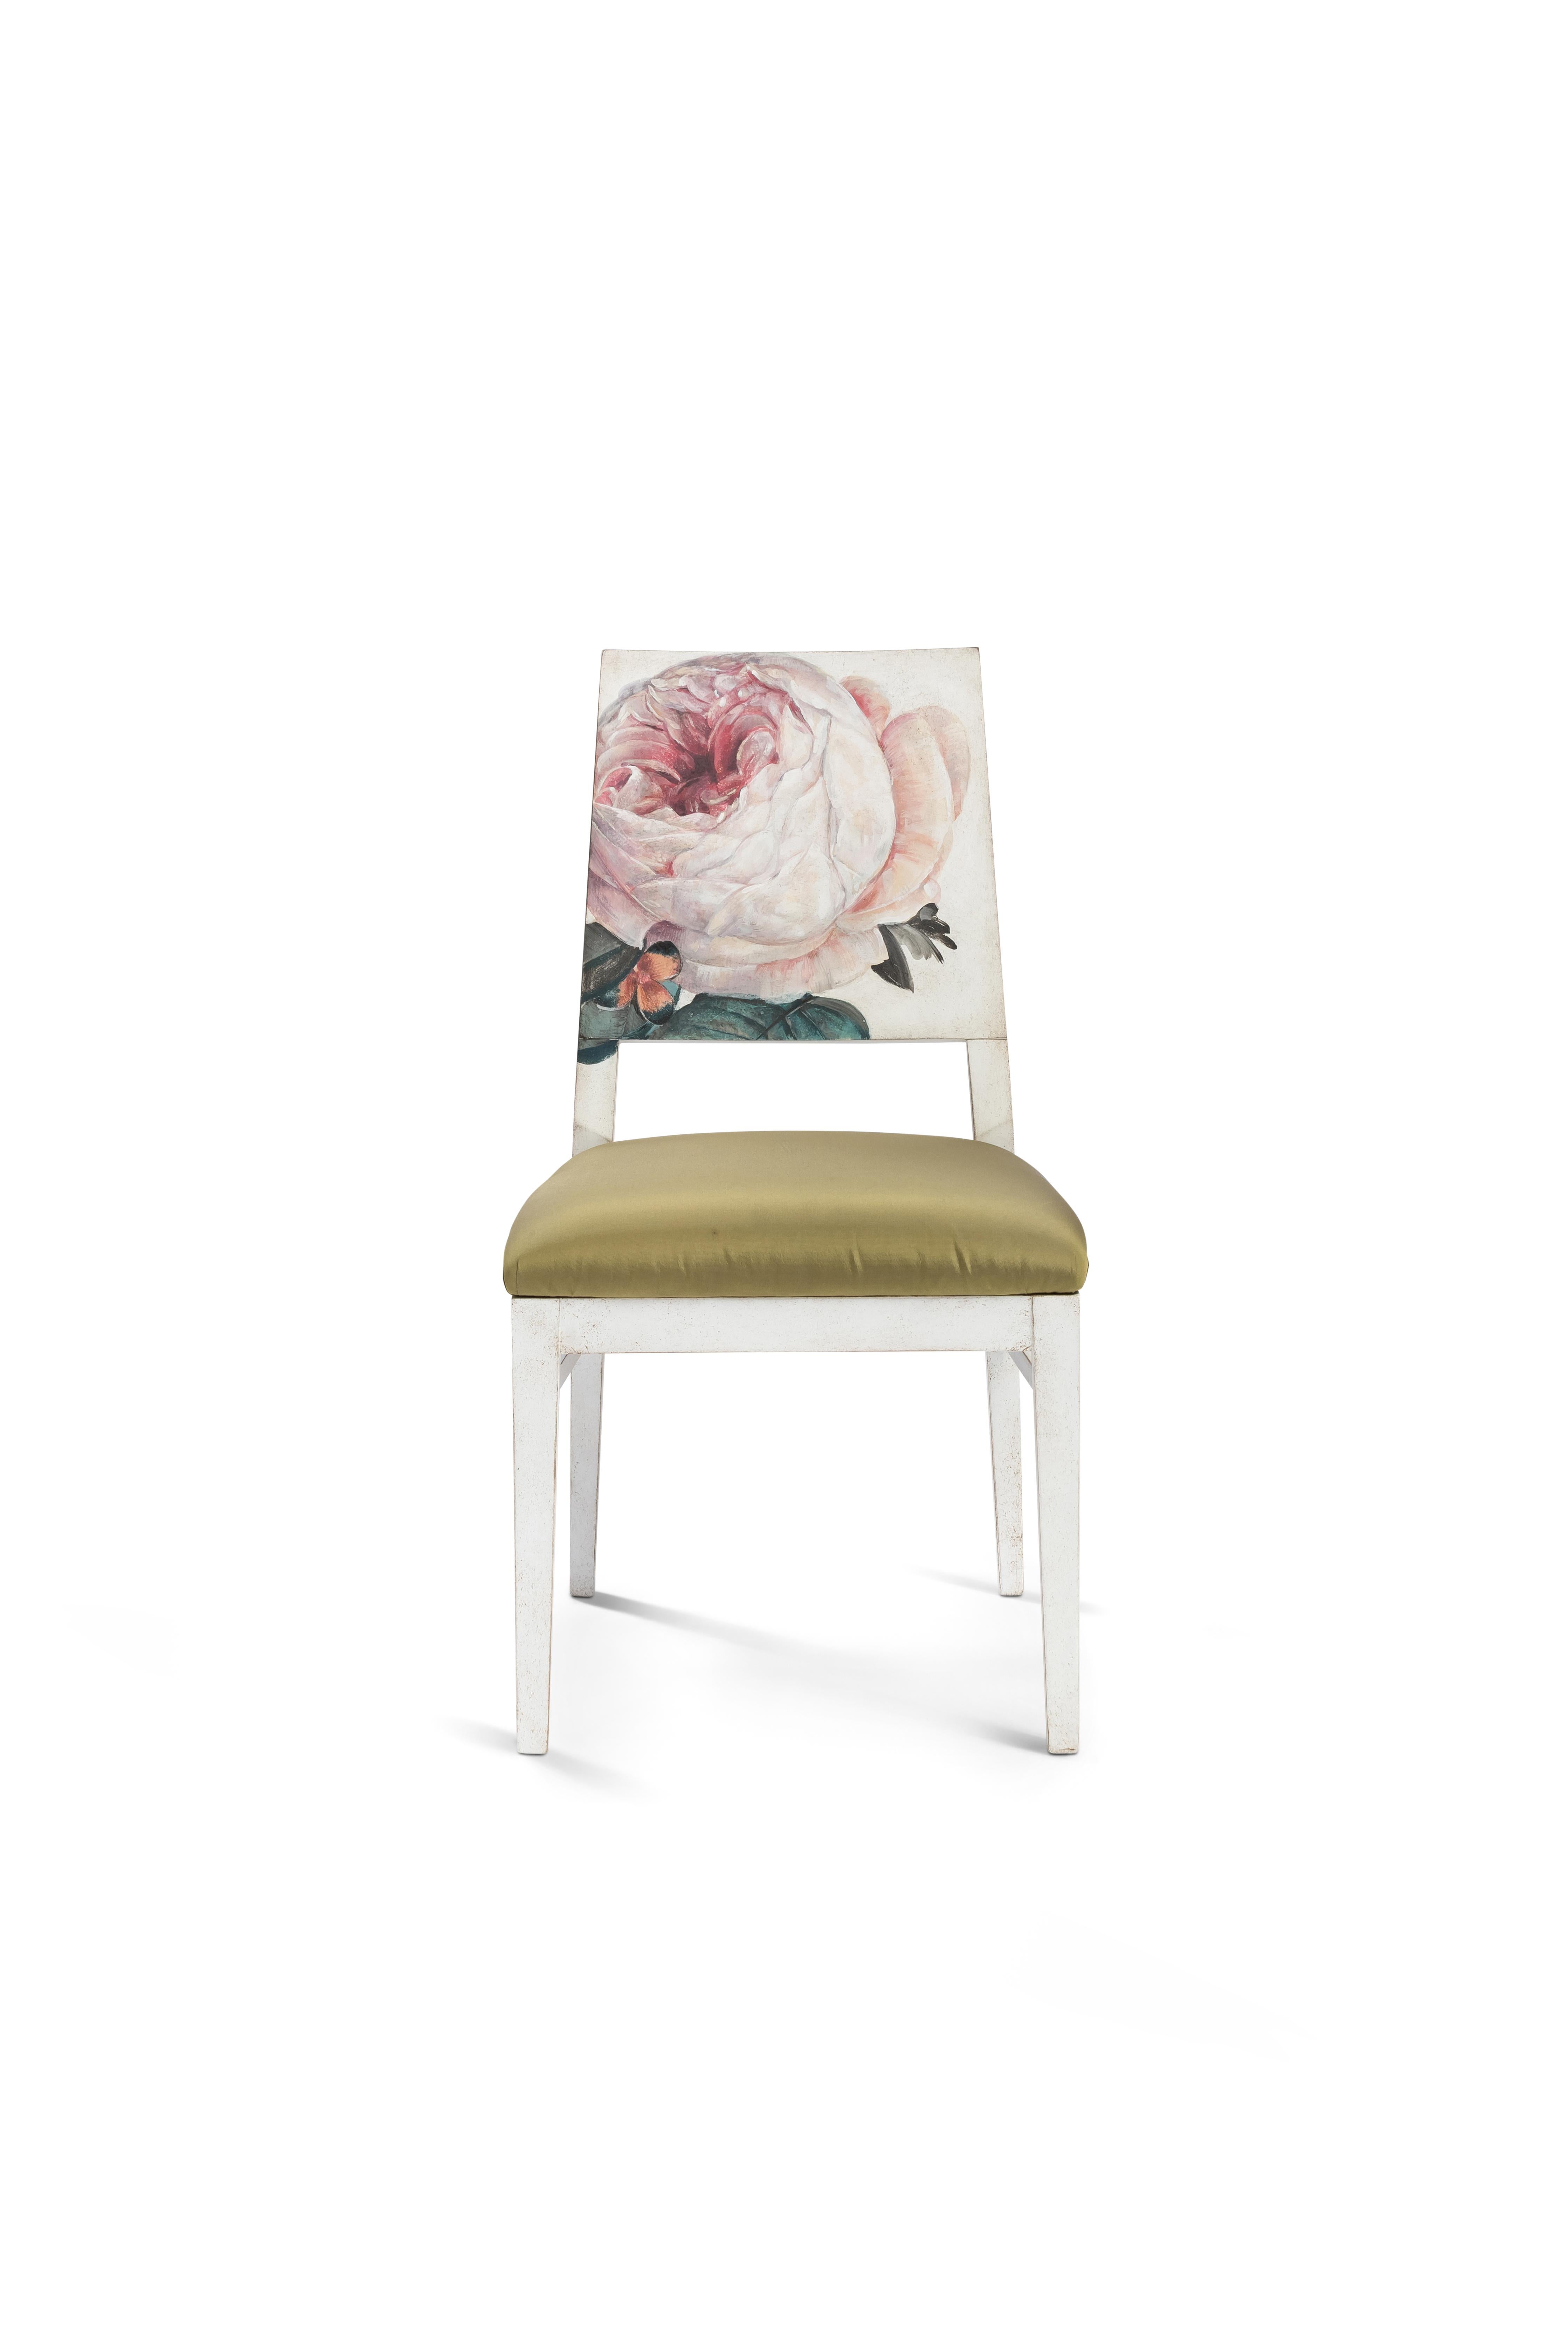 Other 18th Century Hand Painted Venetian White Indigo Dining Chair with English Rose For Sale